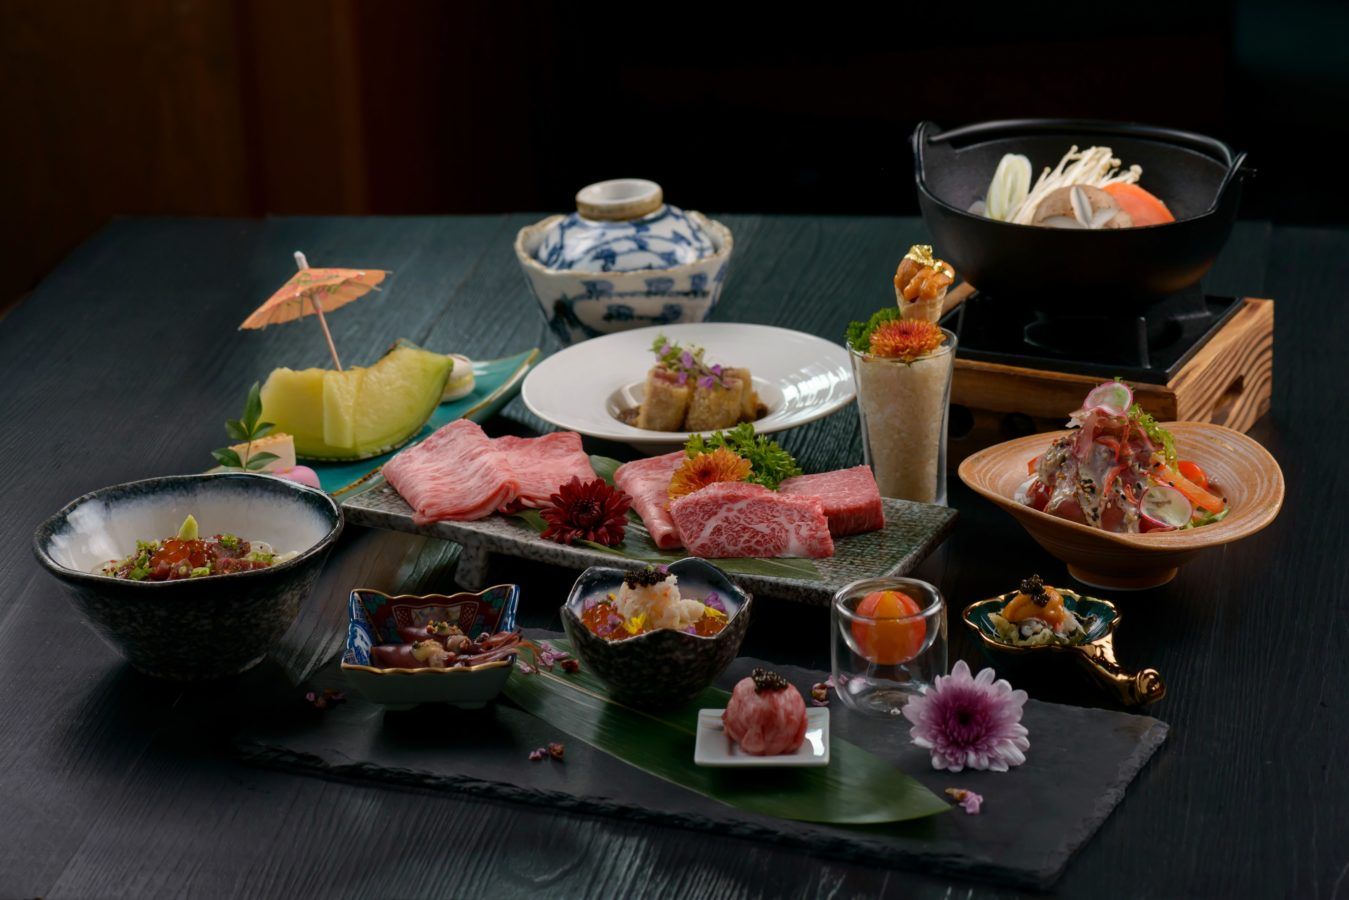 Our top picks for restaurants that specialise in quality Japanese wagyu in Singapore